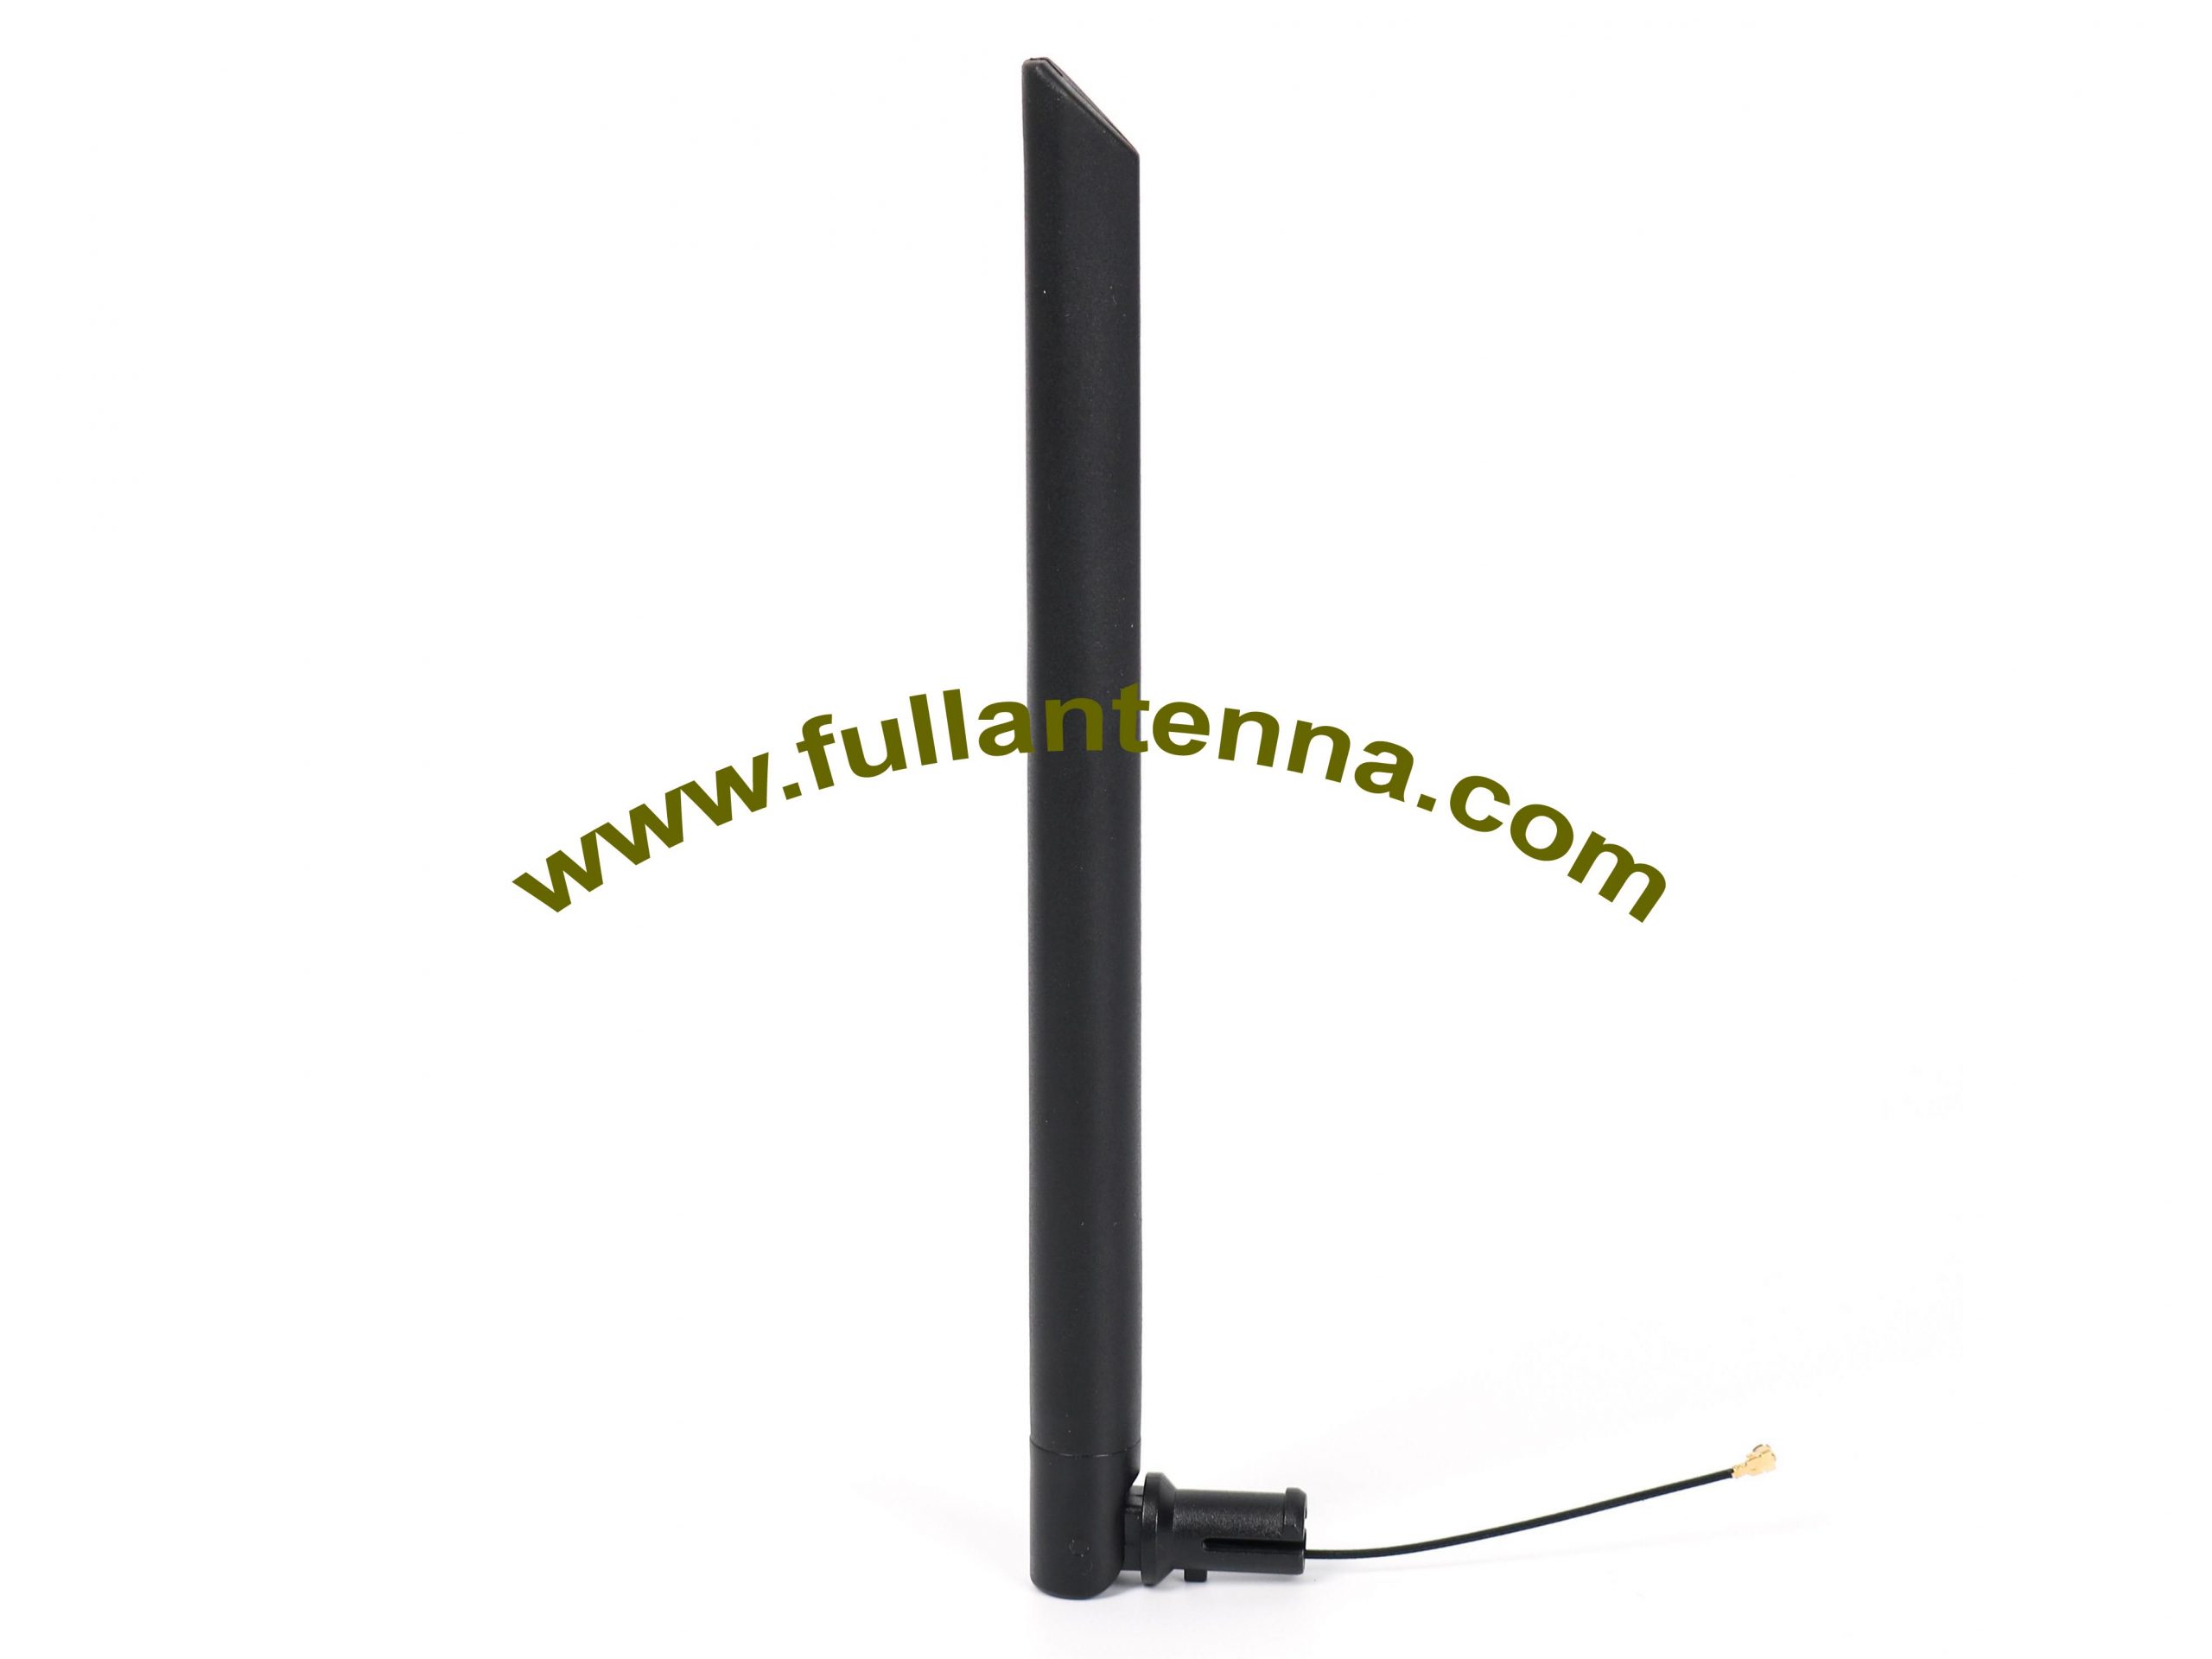 P/N:FALTE.0204,4G/LTE Rubber Antenna,4g antenna with cable  IPEX or U.FL  5dBi gain Featured Image